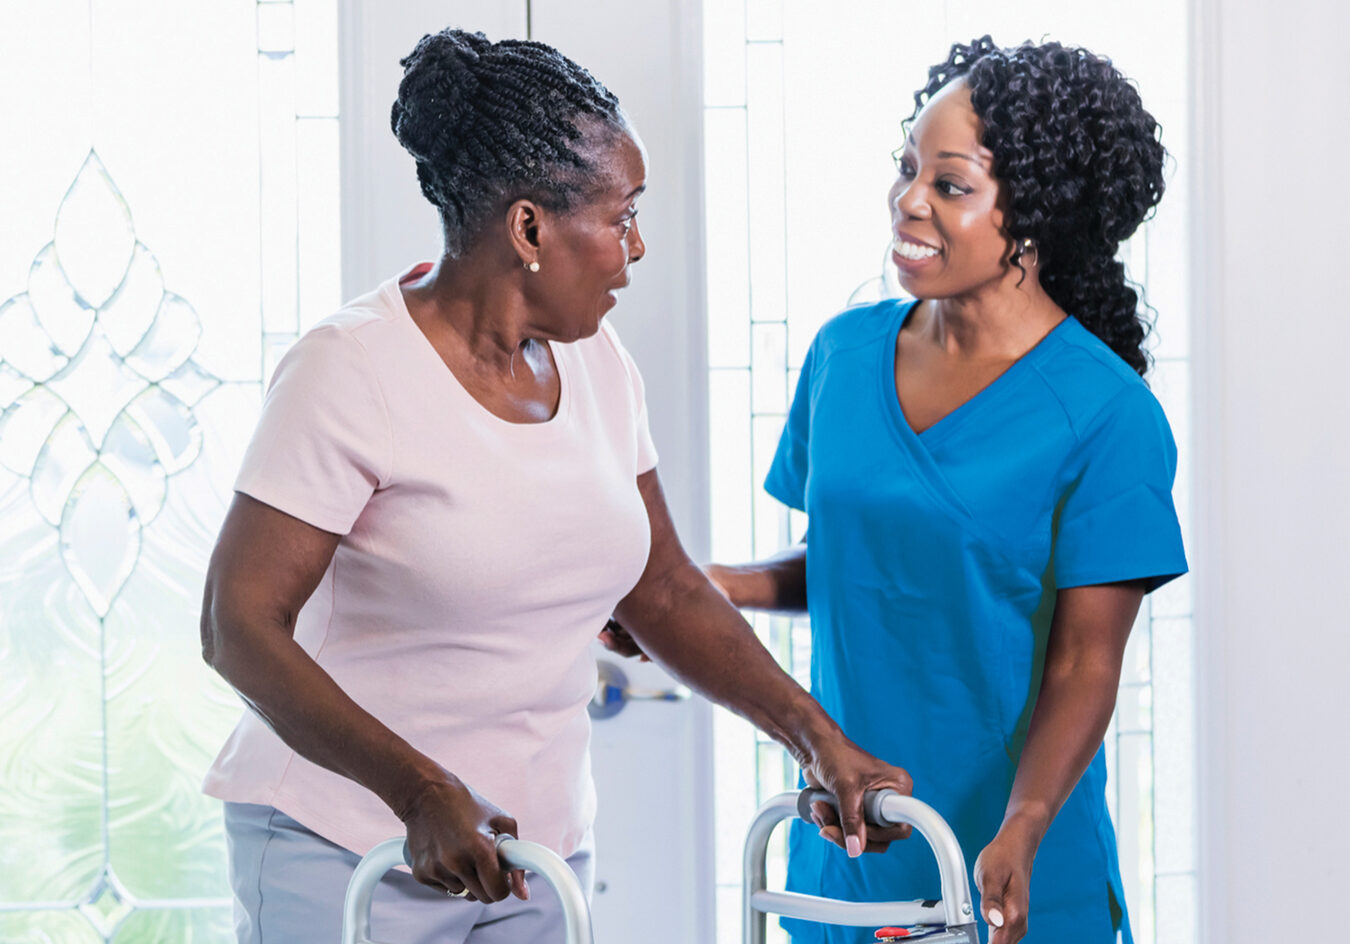 A healthcare worker visiting a senior African-American woman at home, helping her use a mobility walker. The patient is in her 70s and the nurse is a mature woman in her 40s.